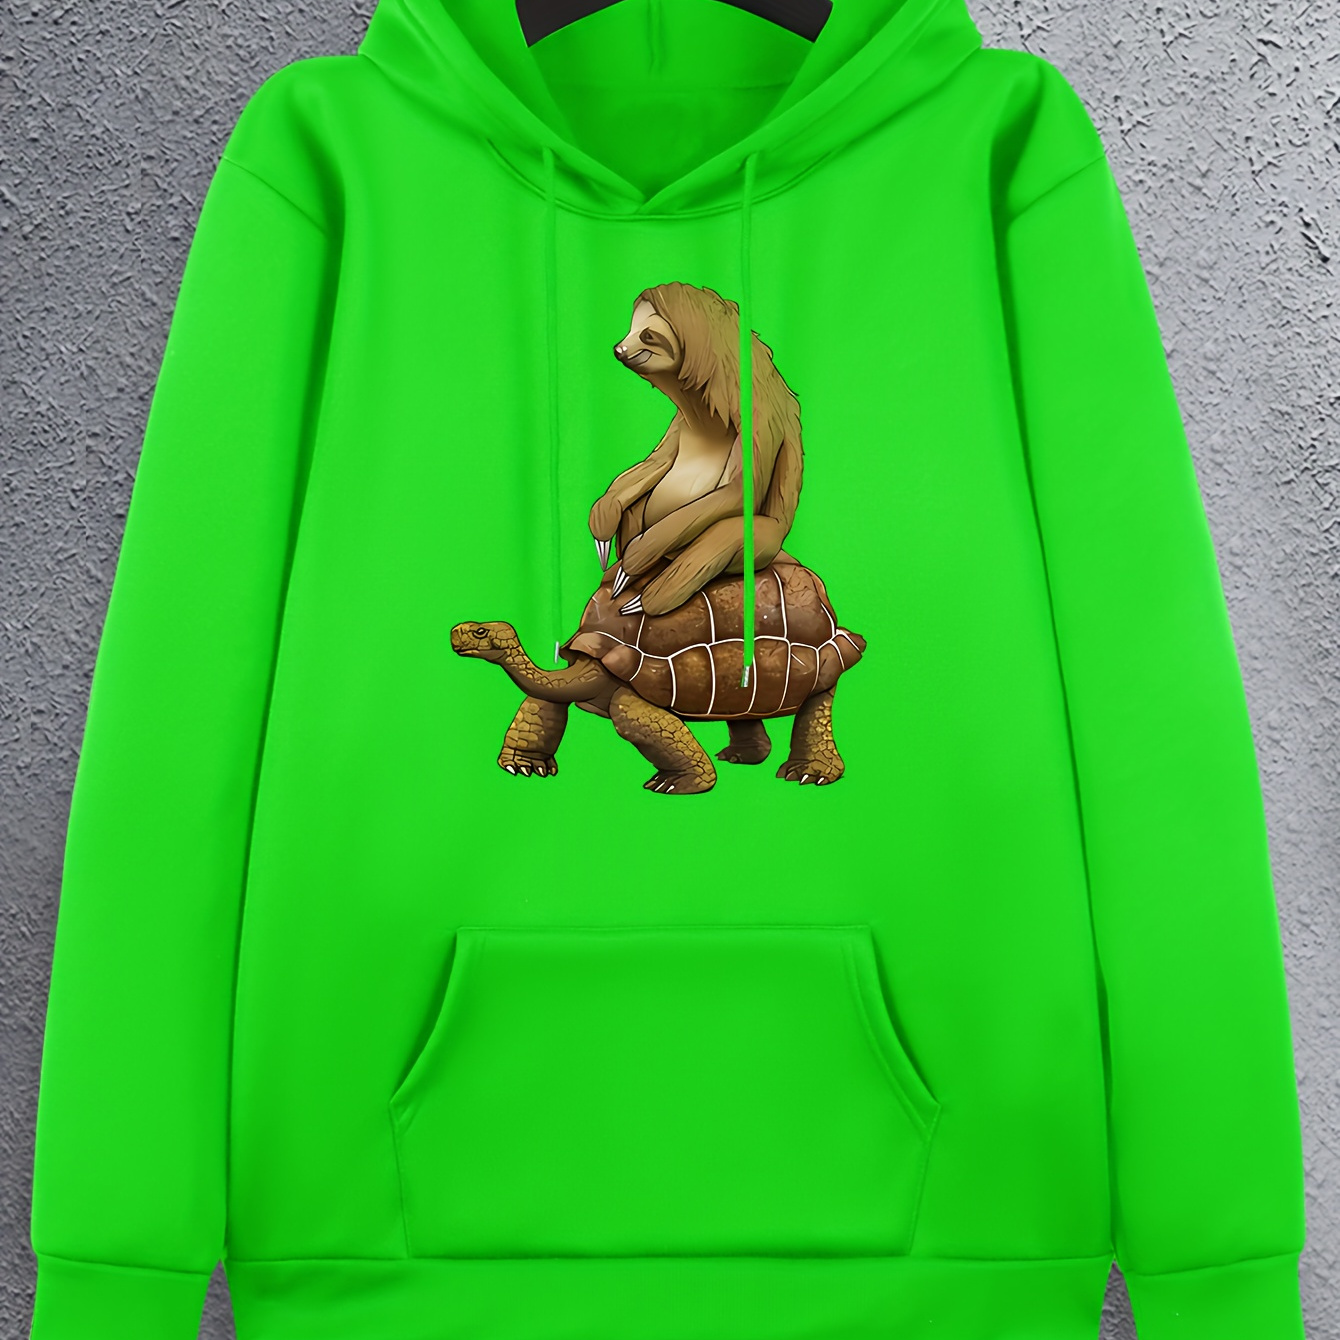 

Cartoon Sloth And Turtle Pattern Print Hooded Sweatshirt, Hoodies Fashion Casual Tops, Men's Clothes For Spring Autumn Outdoor